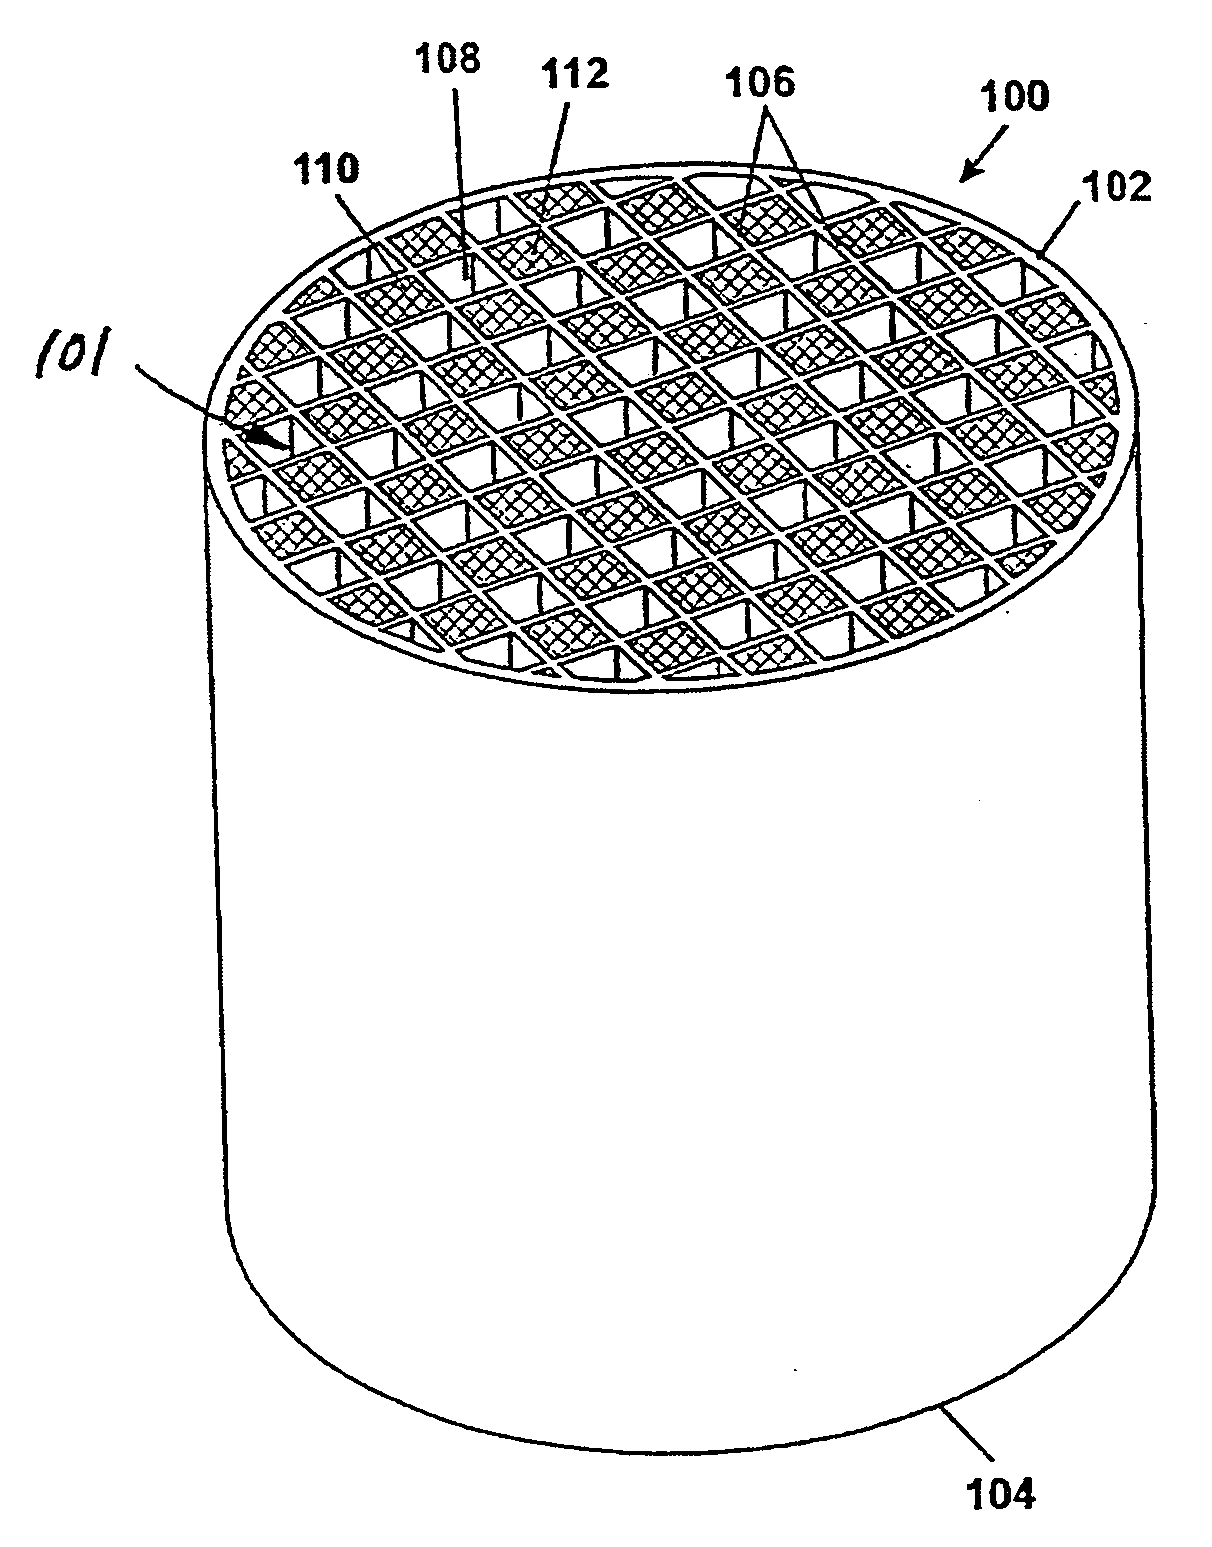 Wall flow reactor for hydrogen production